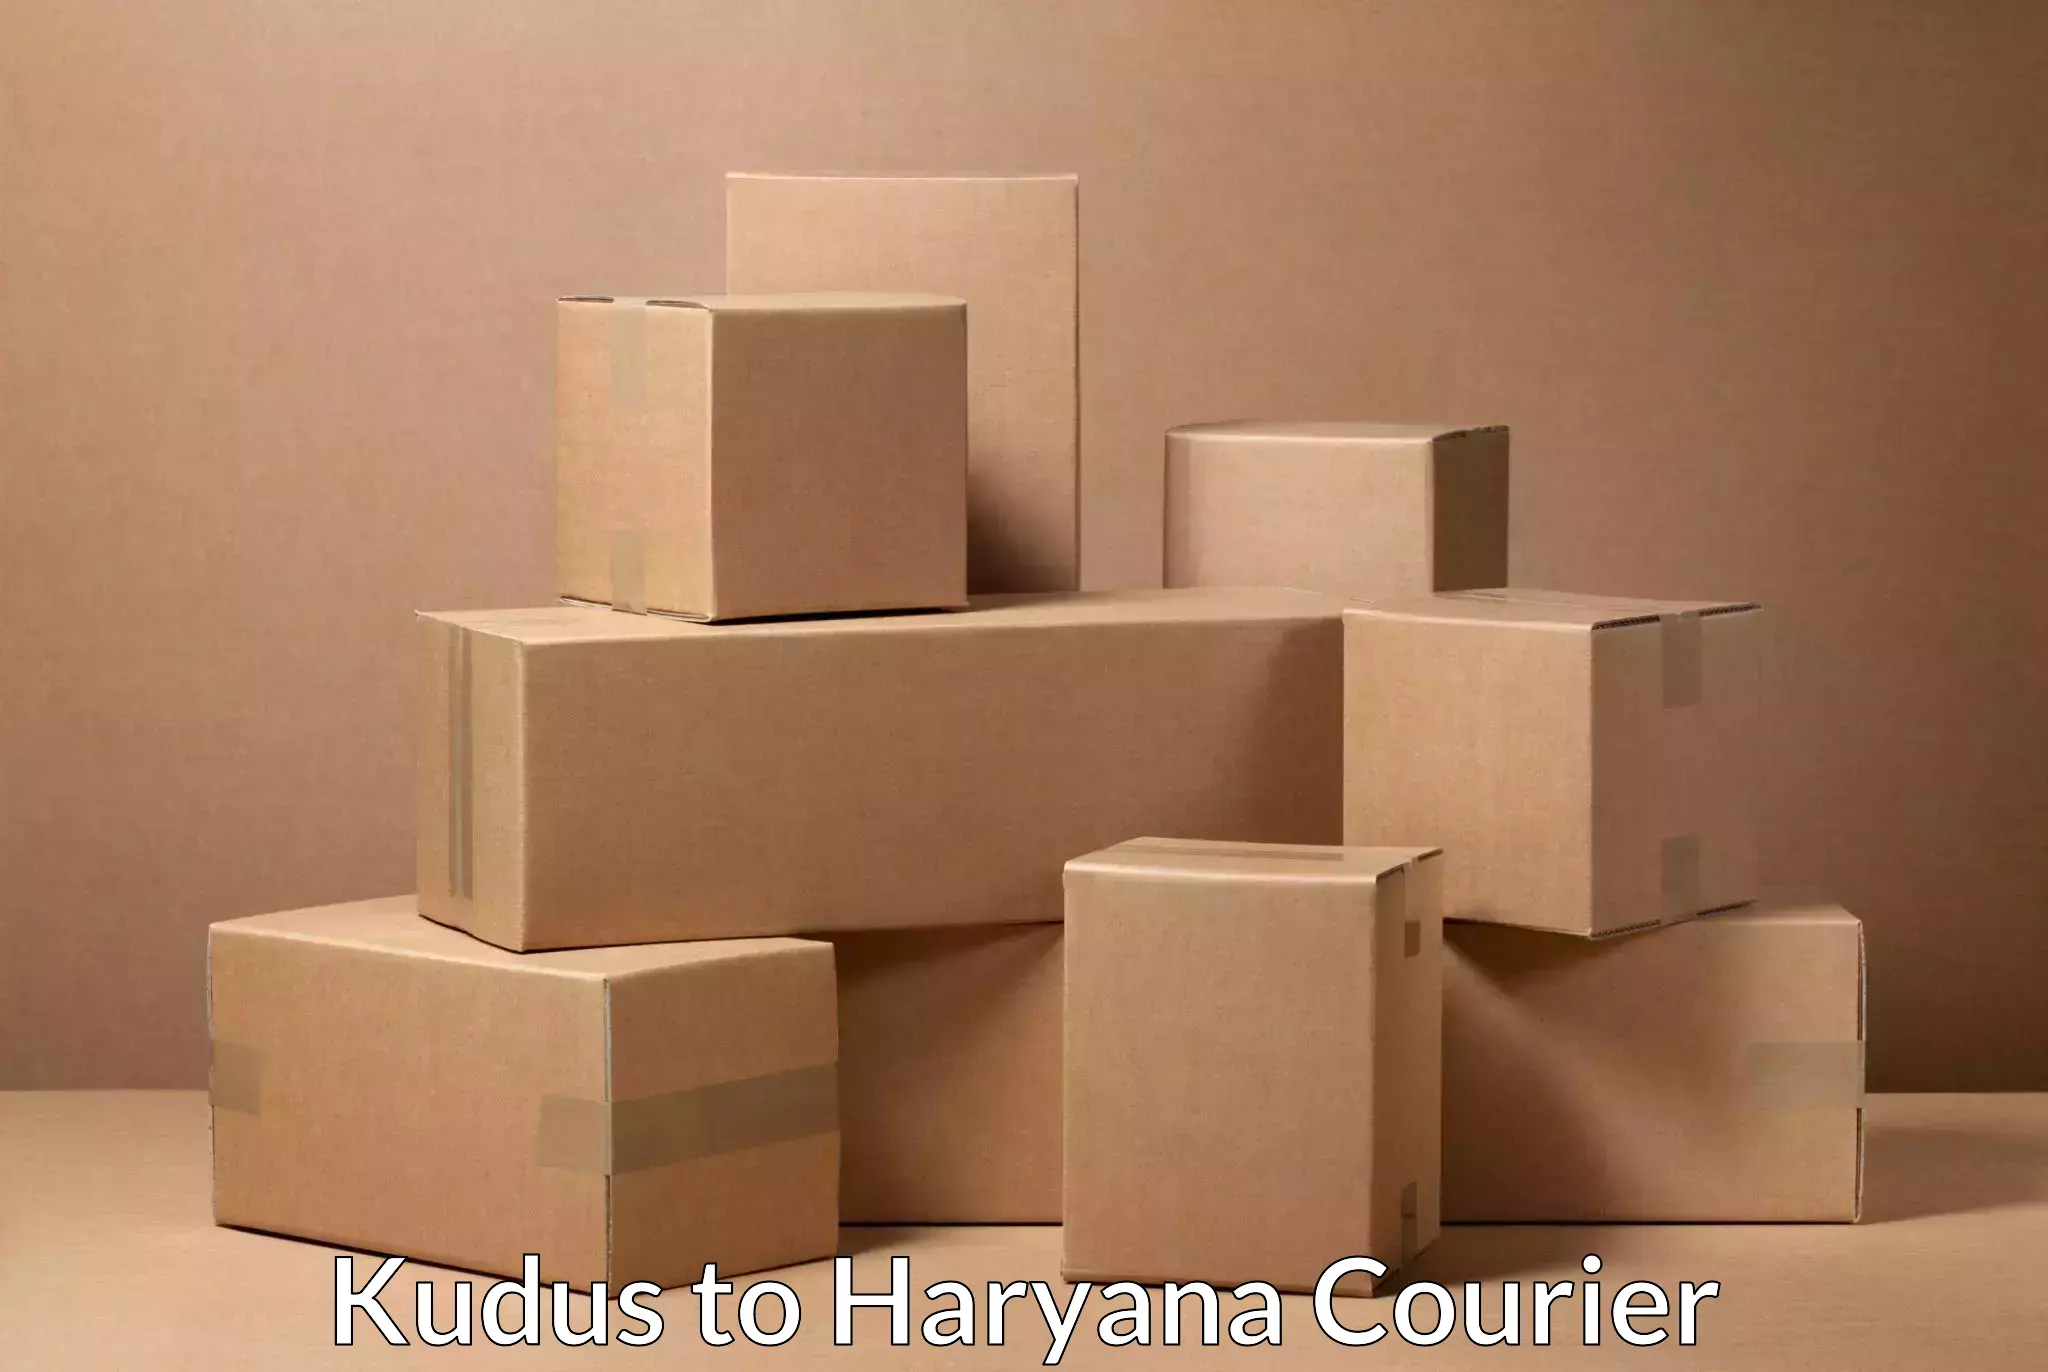 Courier service partnerships Kudus to Jind